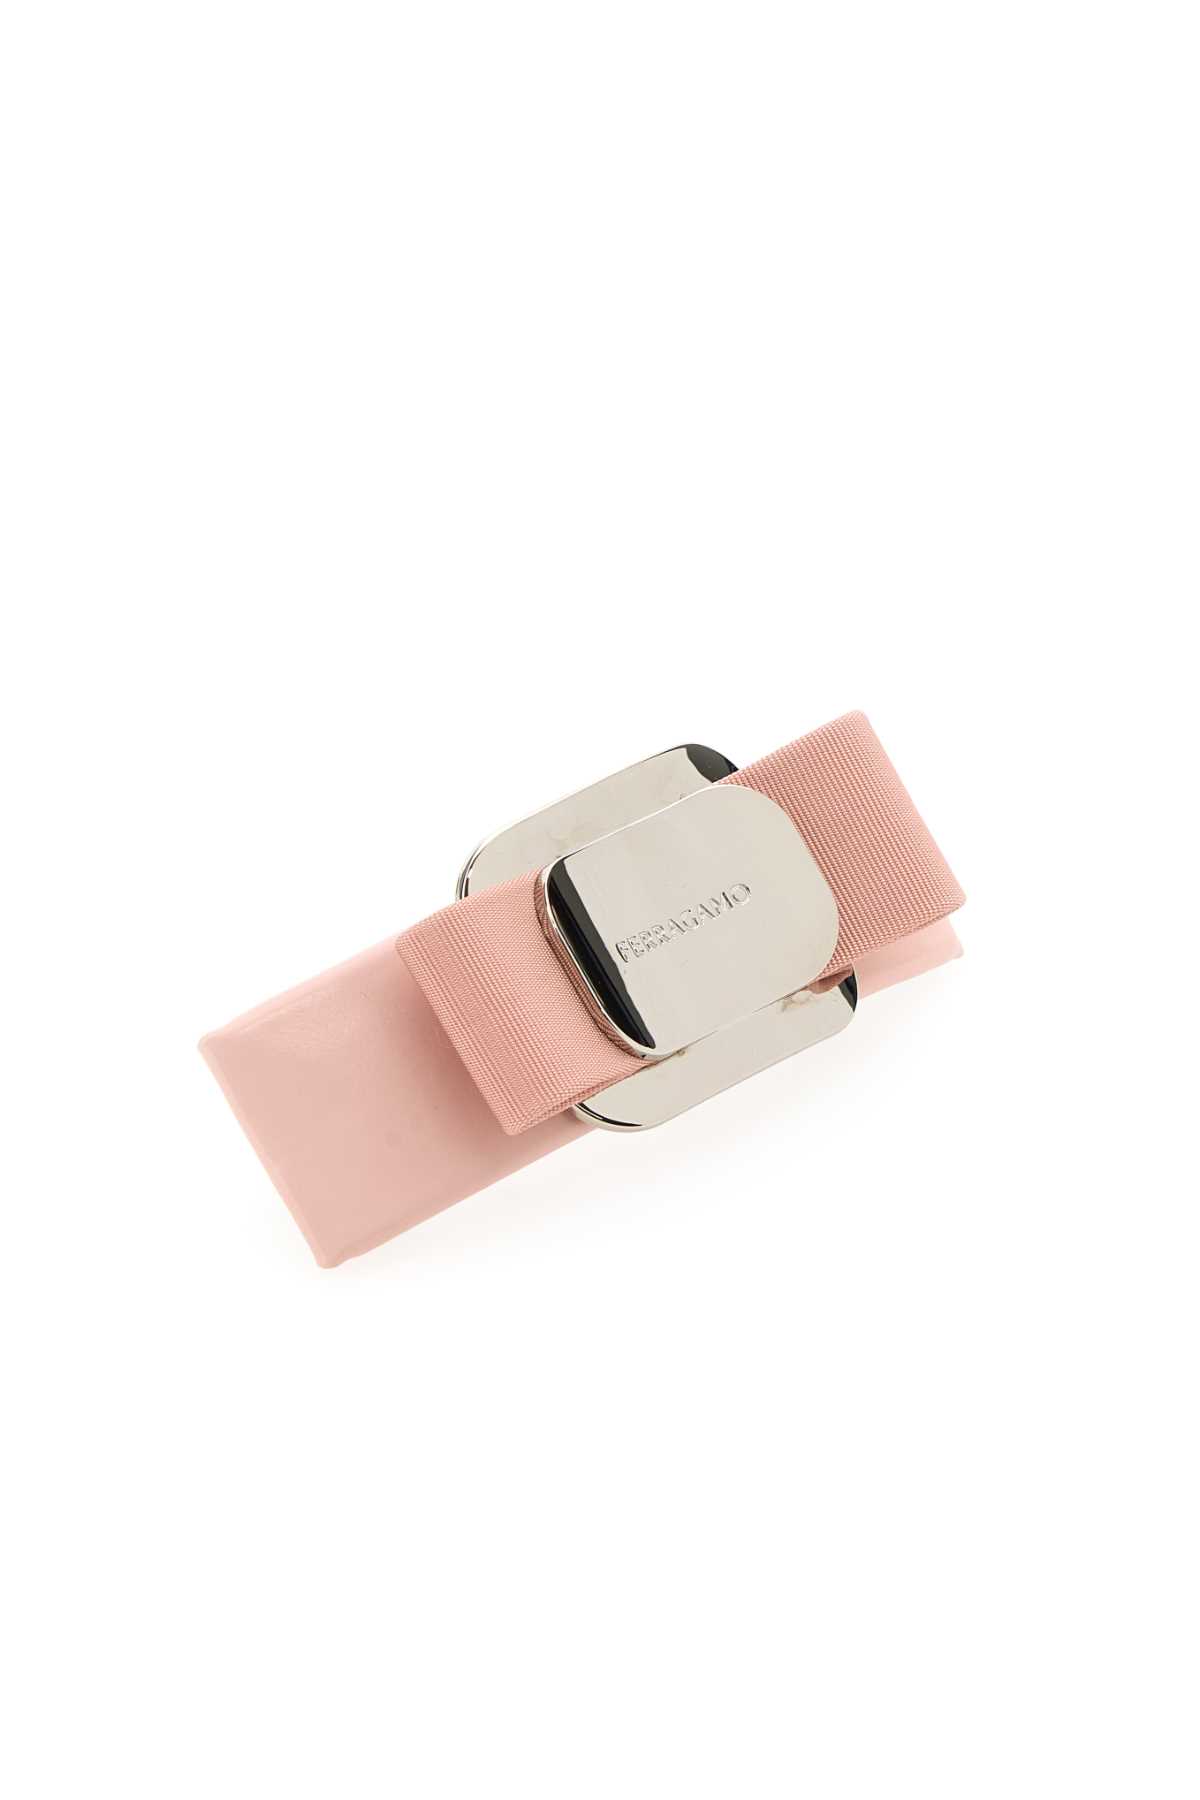 Ferragamo Pink Leather Hair Clip In Nylundpink